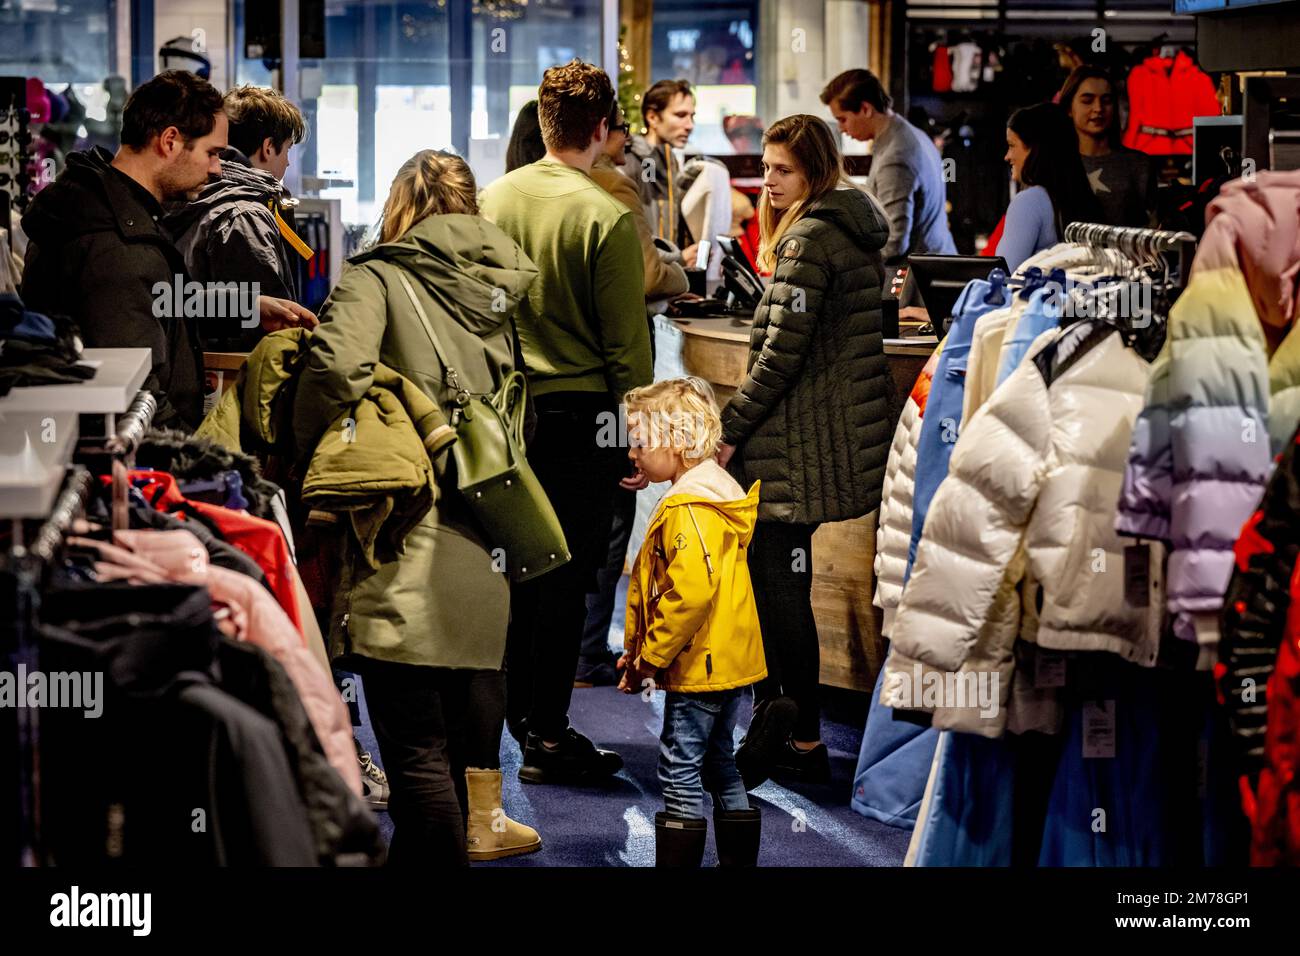 SCHEVENINGEN - Customers looking for winter sports items in the Skihut  shop. In the run-up to winter sports, there is a run for winter sports  clothing despite the less favorable weather conditions